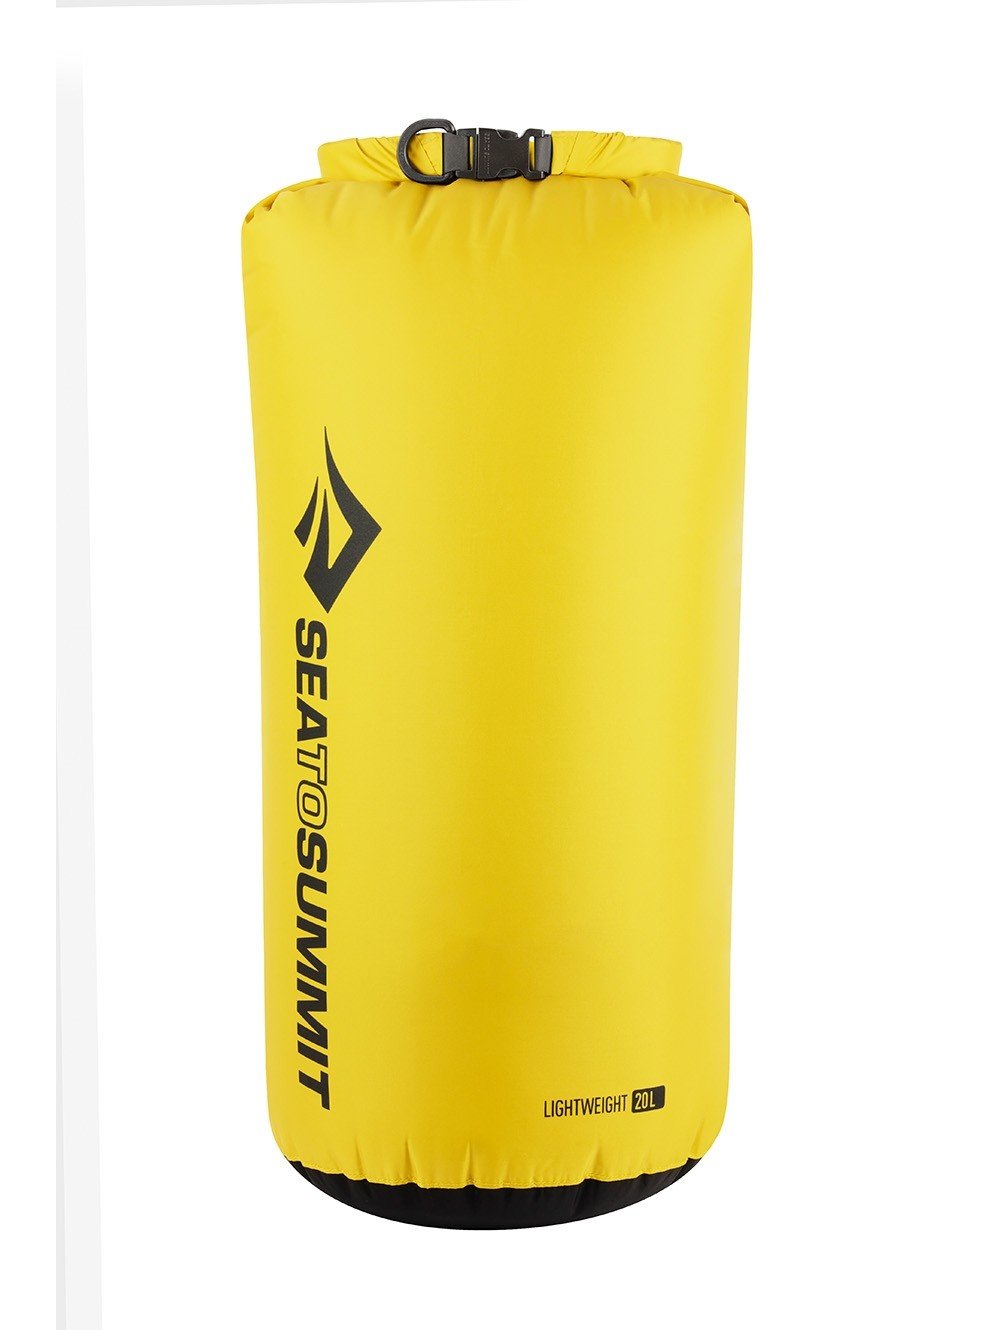 Sea To Summit Lightweight 70D 20 Litres Dry Sack Bags, Packs and Cases Sea To Summit Yellow Tactical Gear Supplier Tactical Distributors Australia